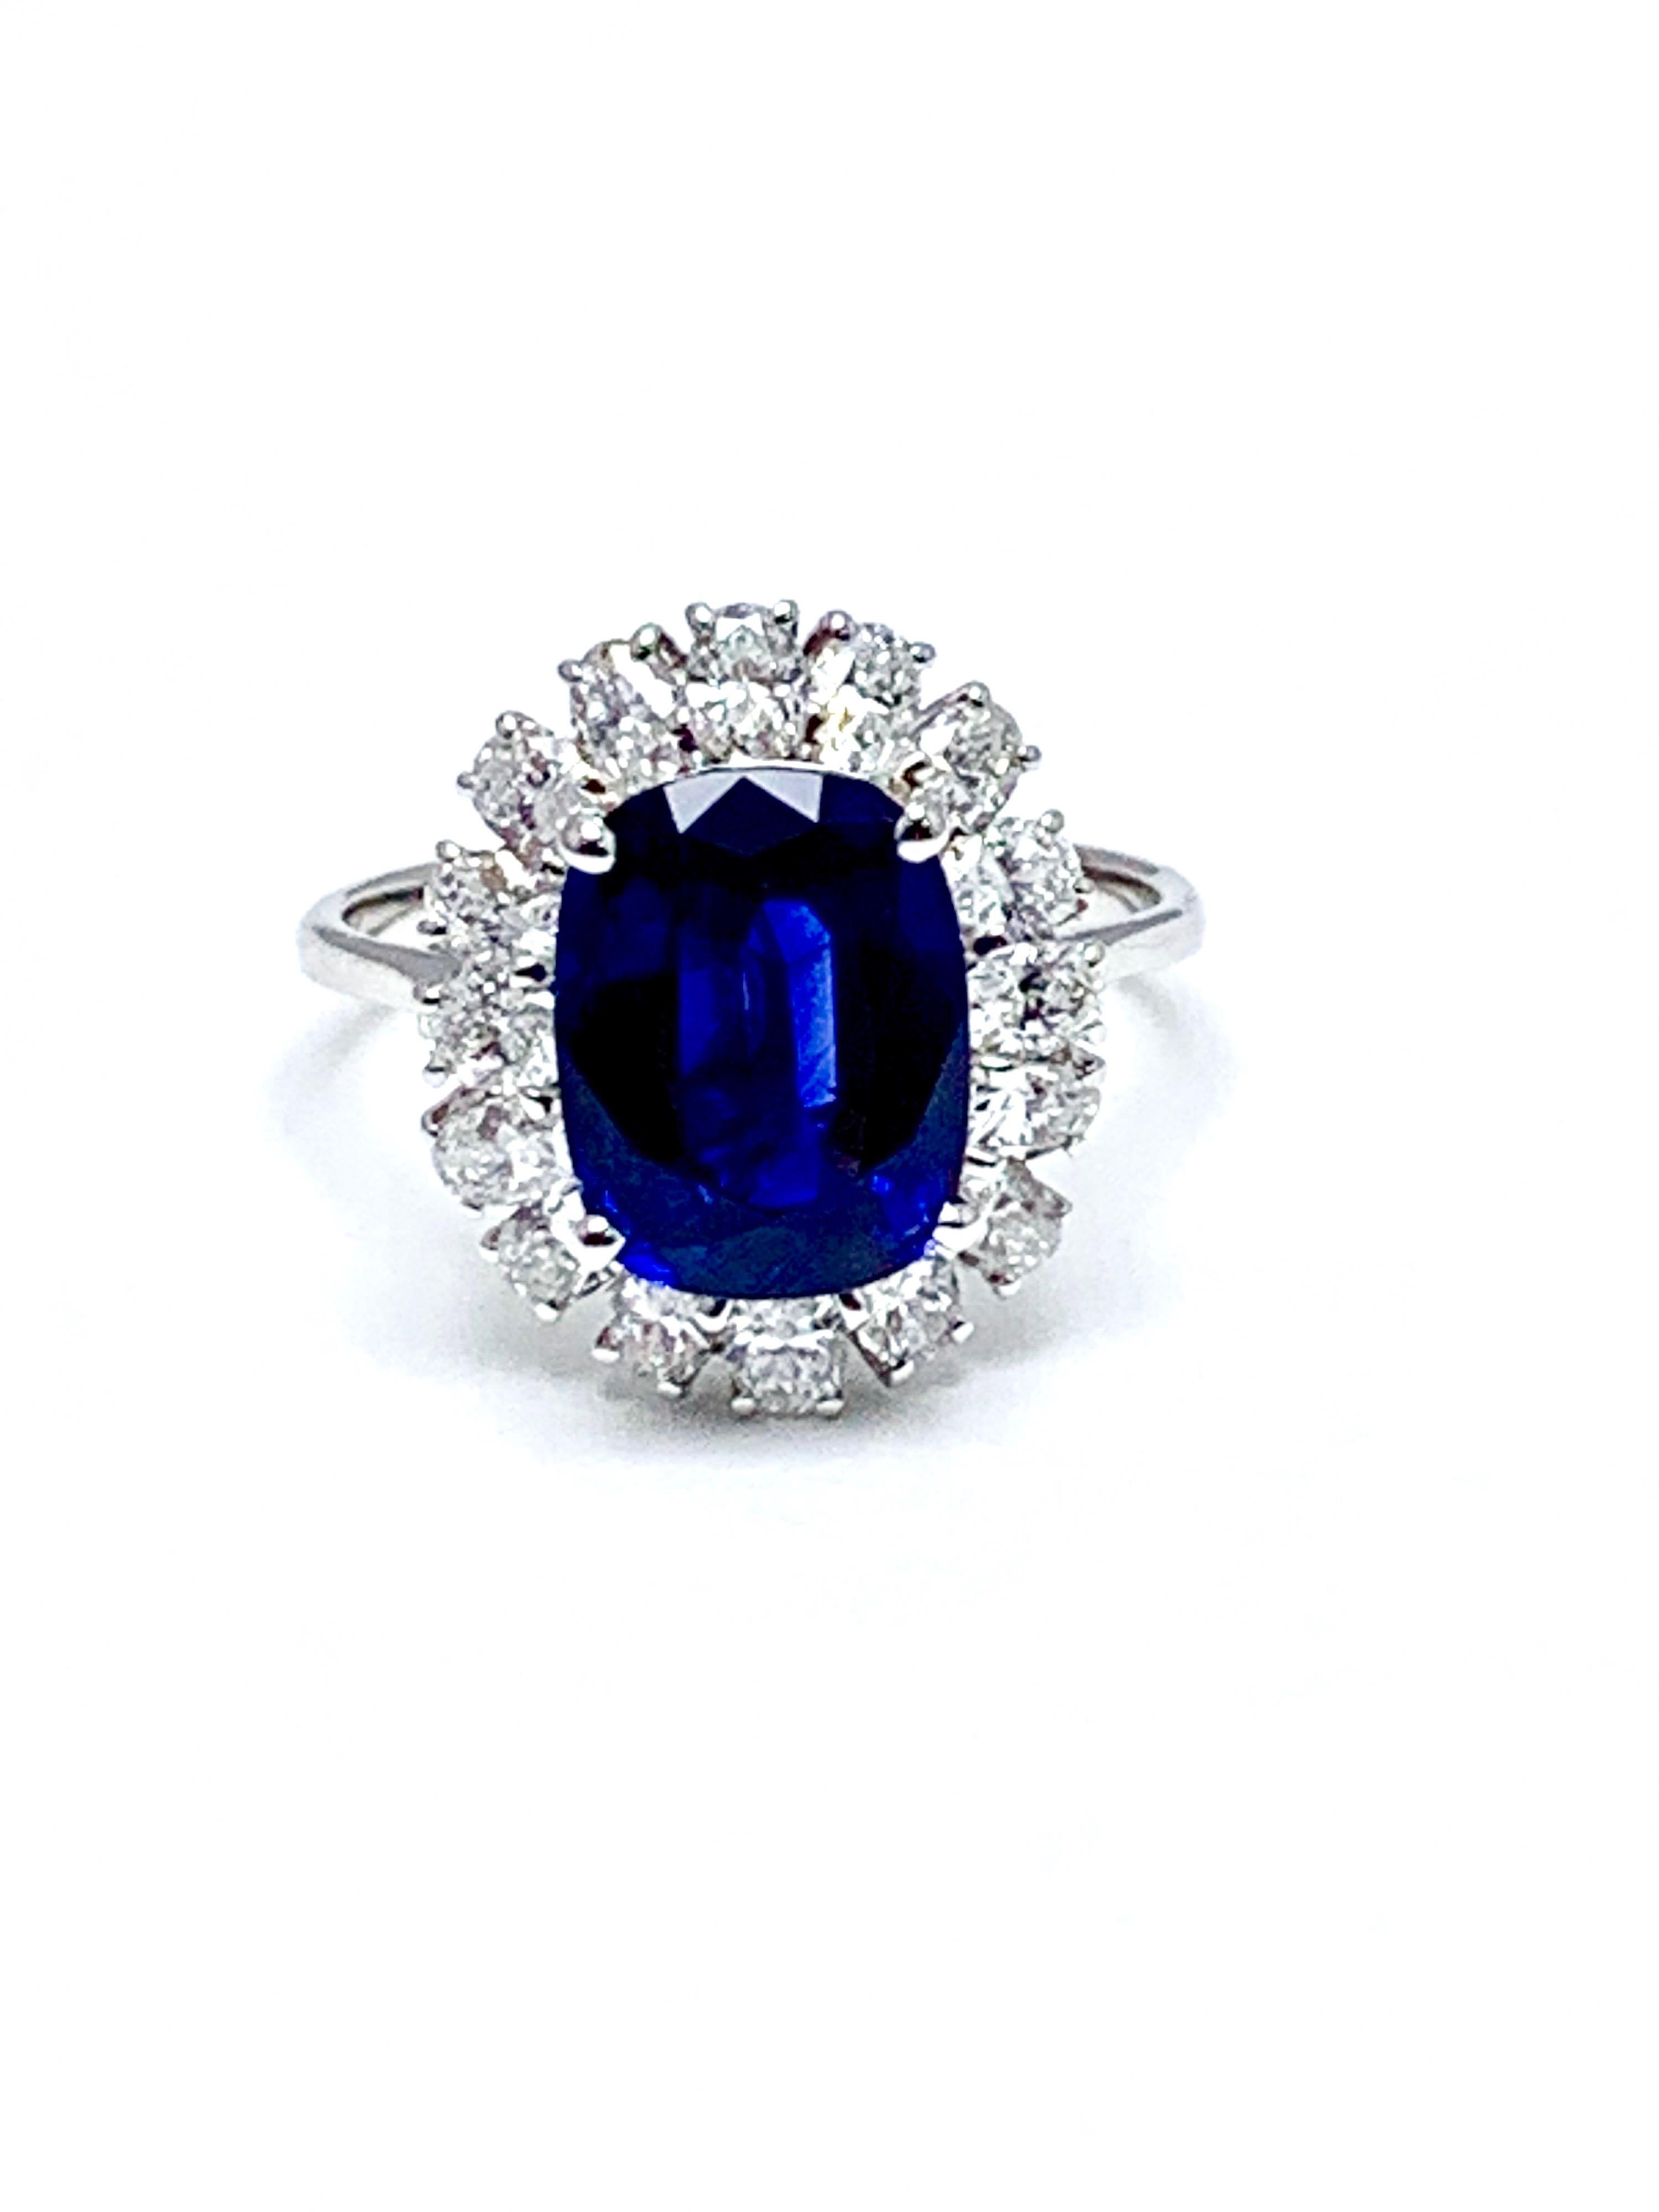 4.60 Carat Cushion Cut Sapphire and Oval Diamond Halo White Gold Cocktail Ring For Sale 2